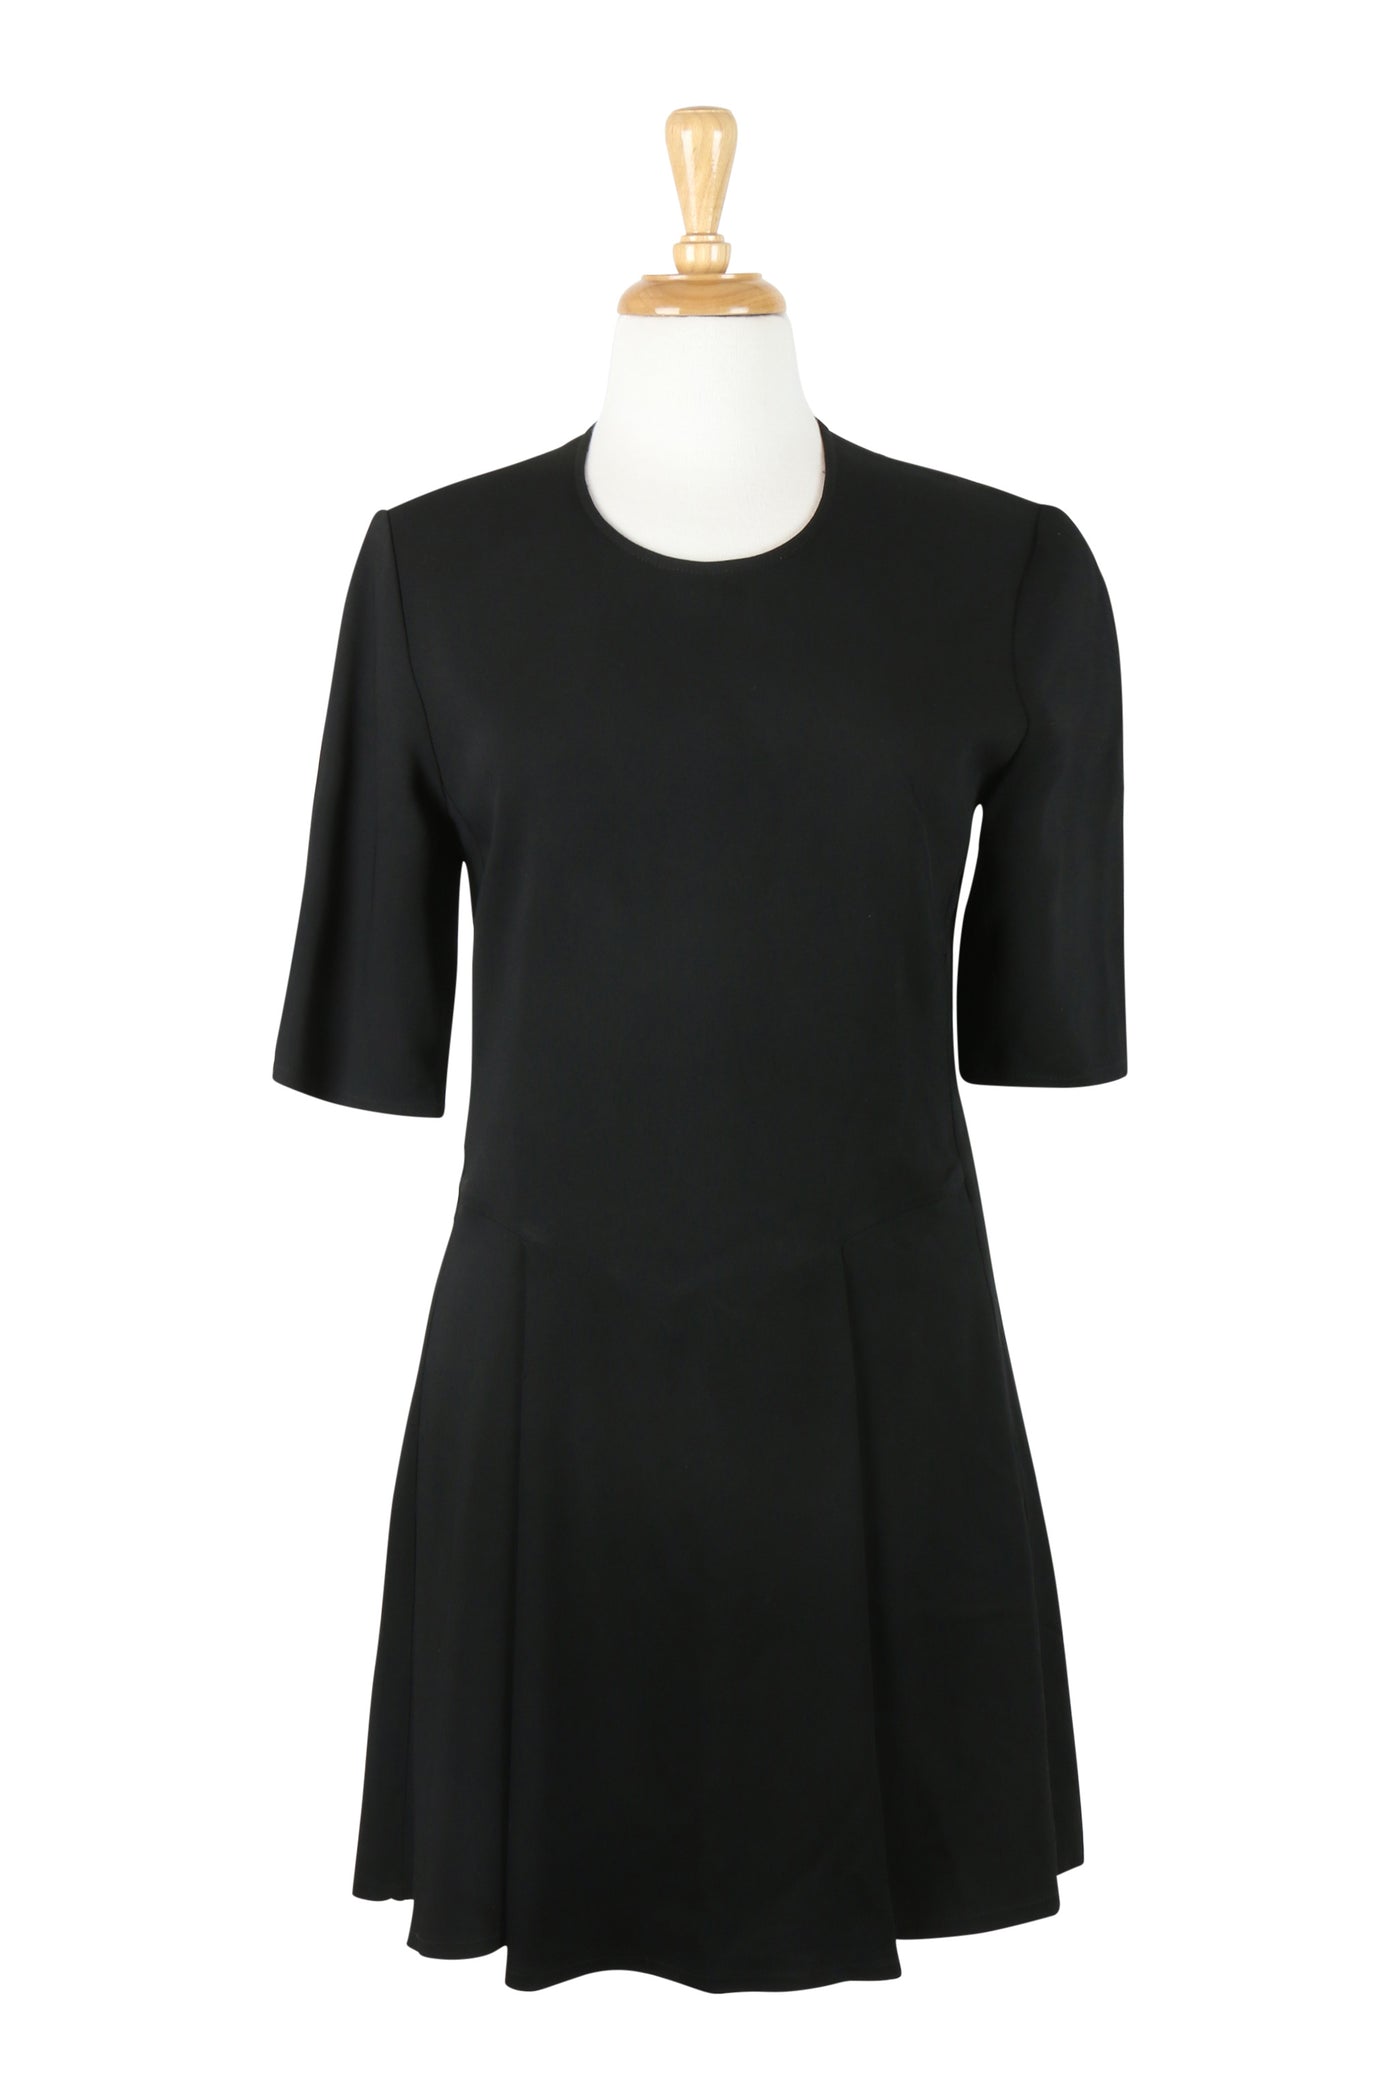 Little Black Dress with Short Sleeves